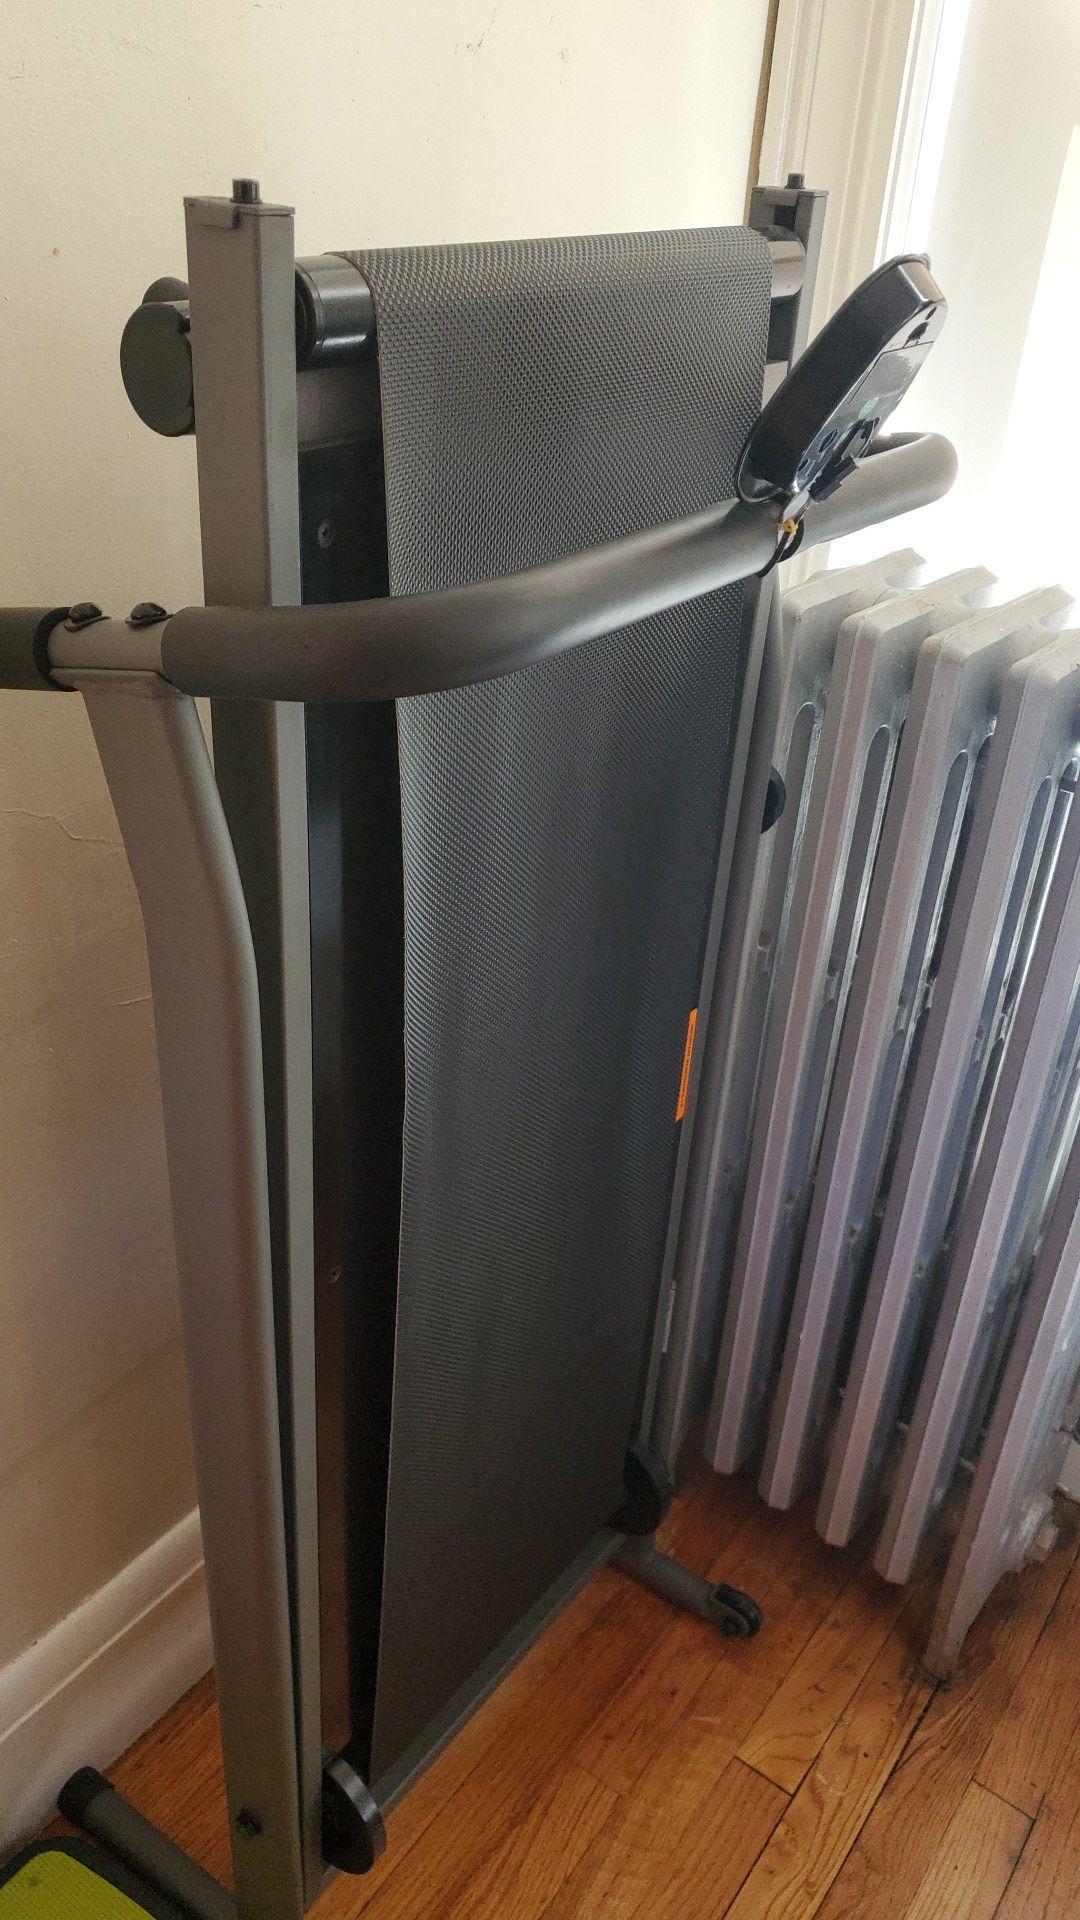 Welso Treadmill not electric MAKE OFFER